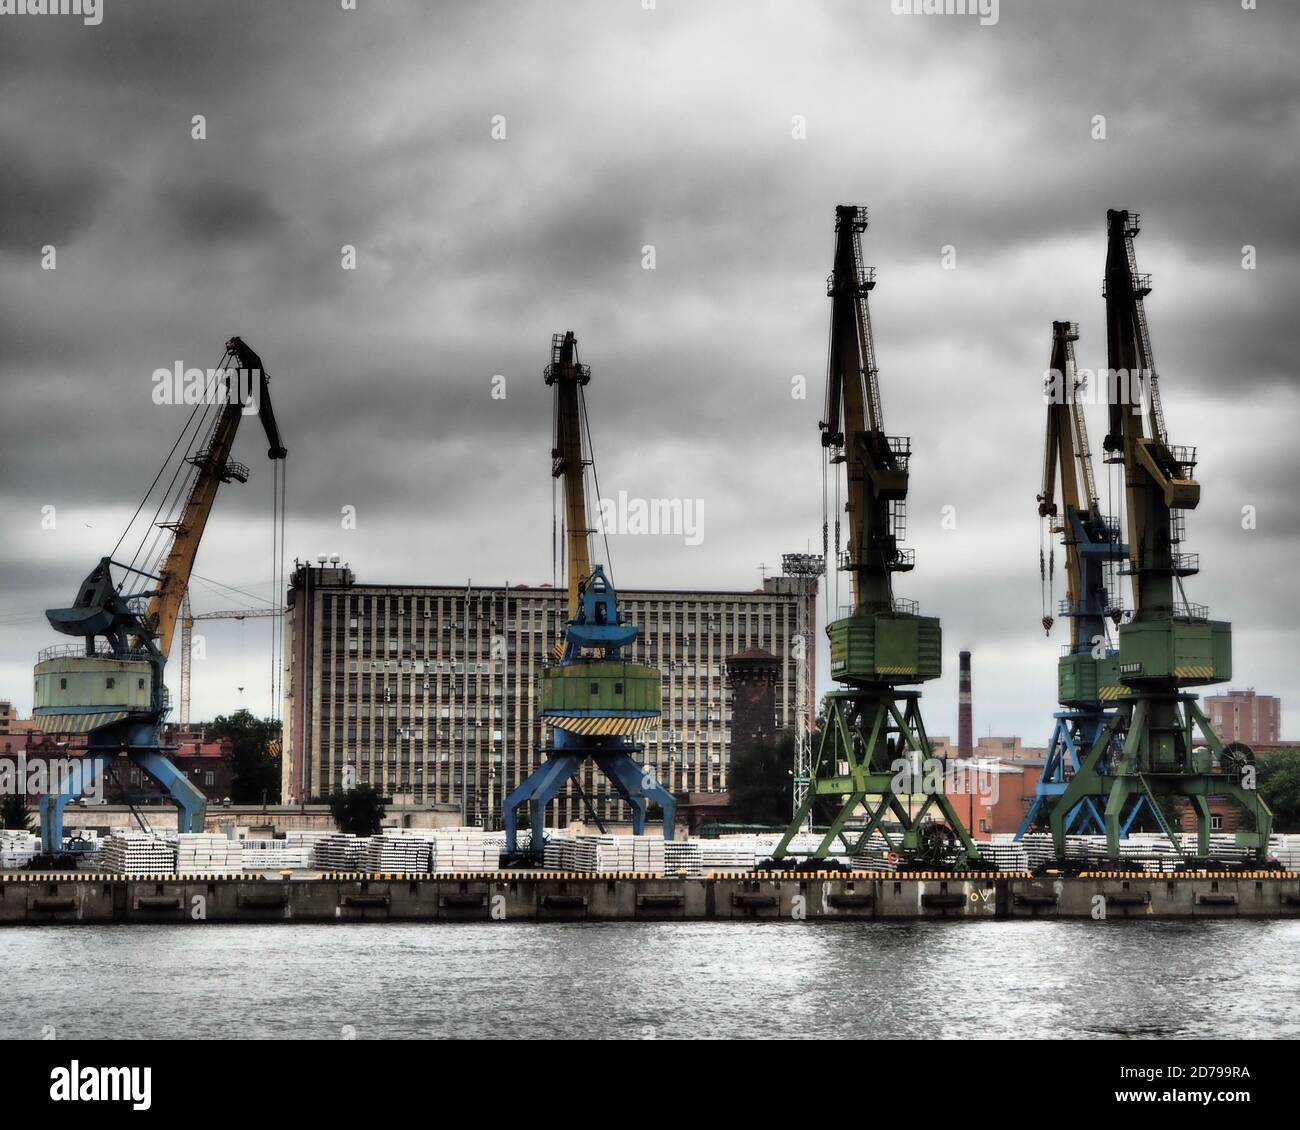 Cranes by riverside warehouses in St Petersburg, Russia Stock Photo